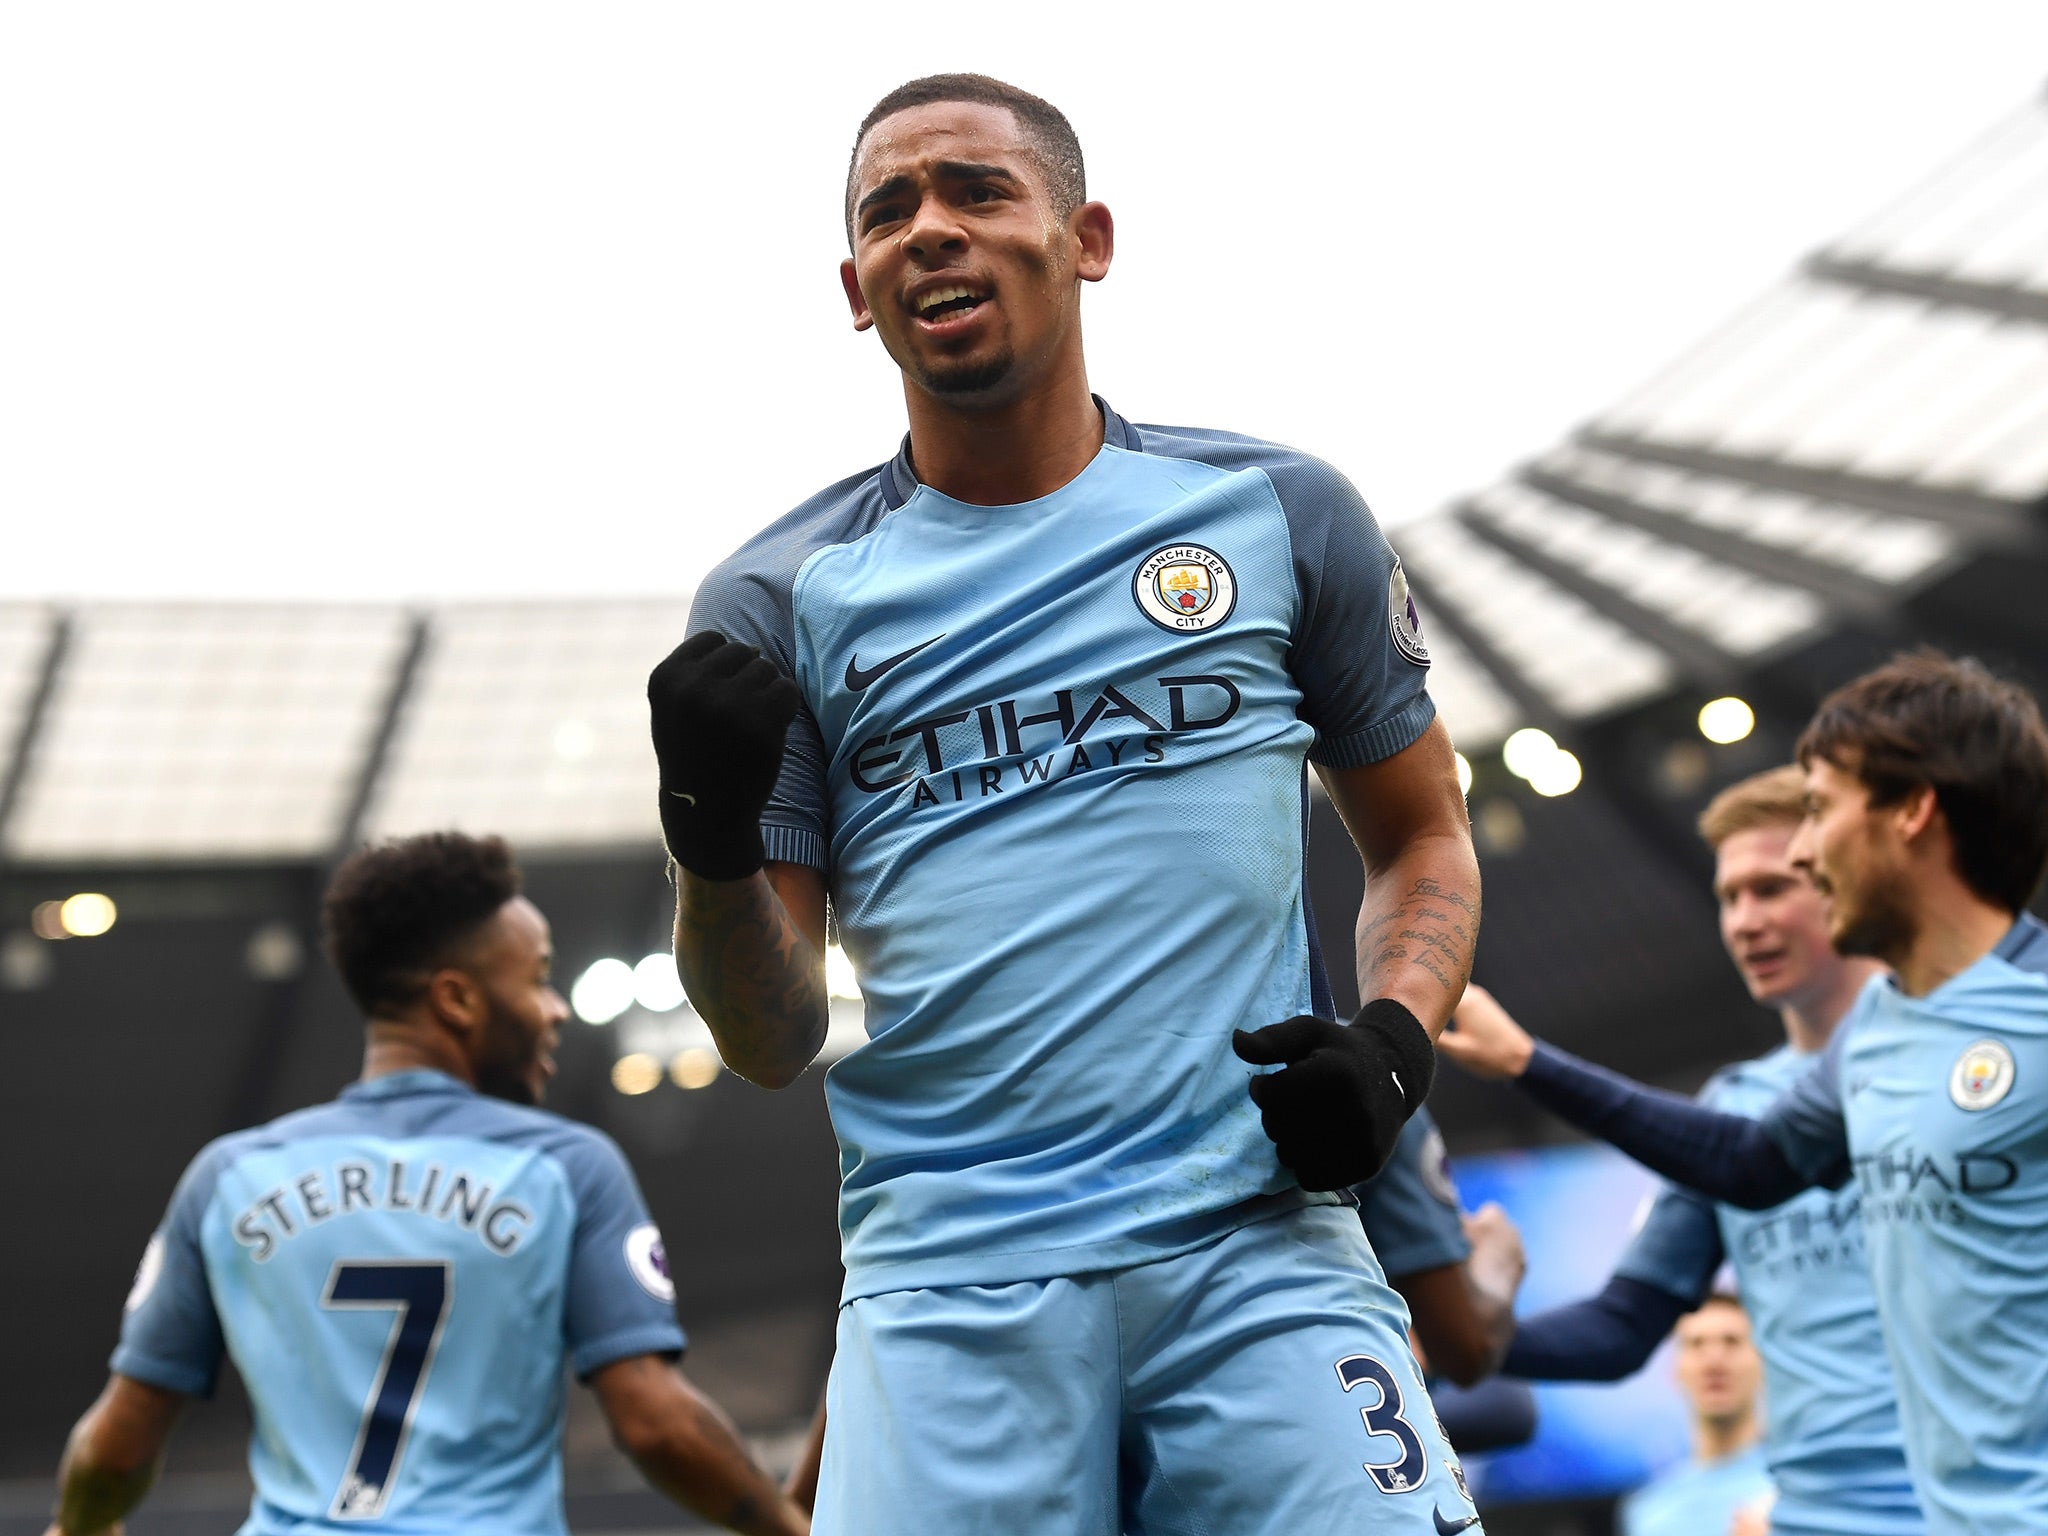 Gabriel Jesus opened the scoring from close range in the 11th minute